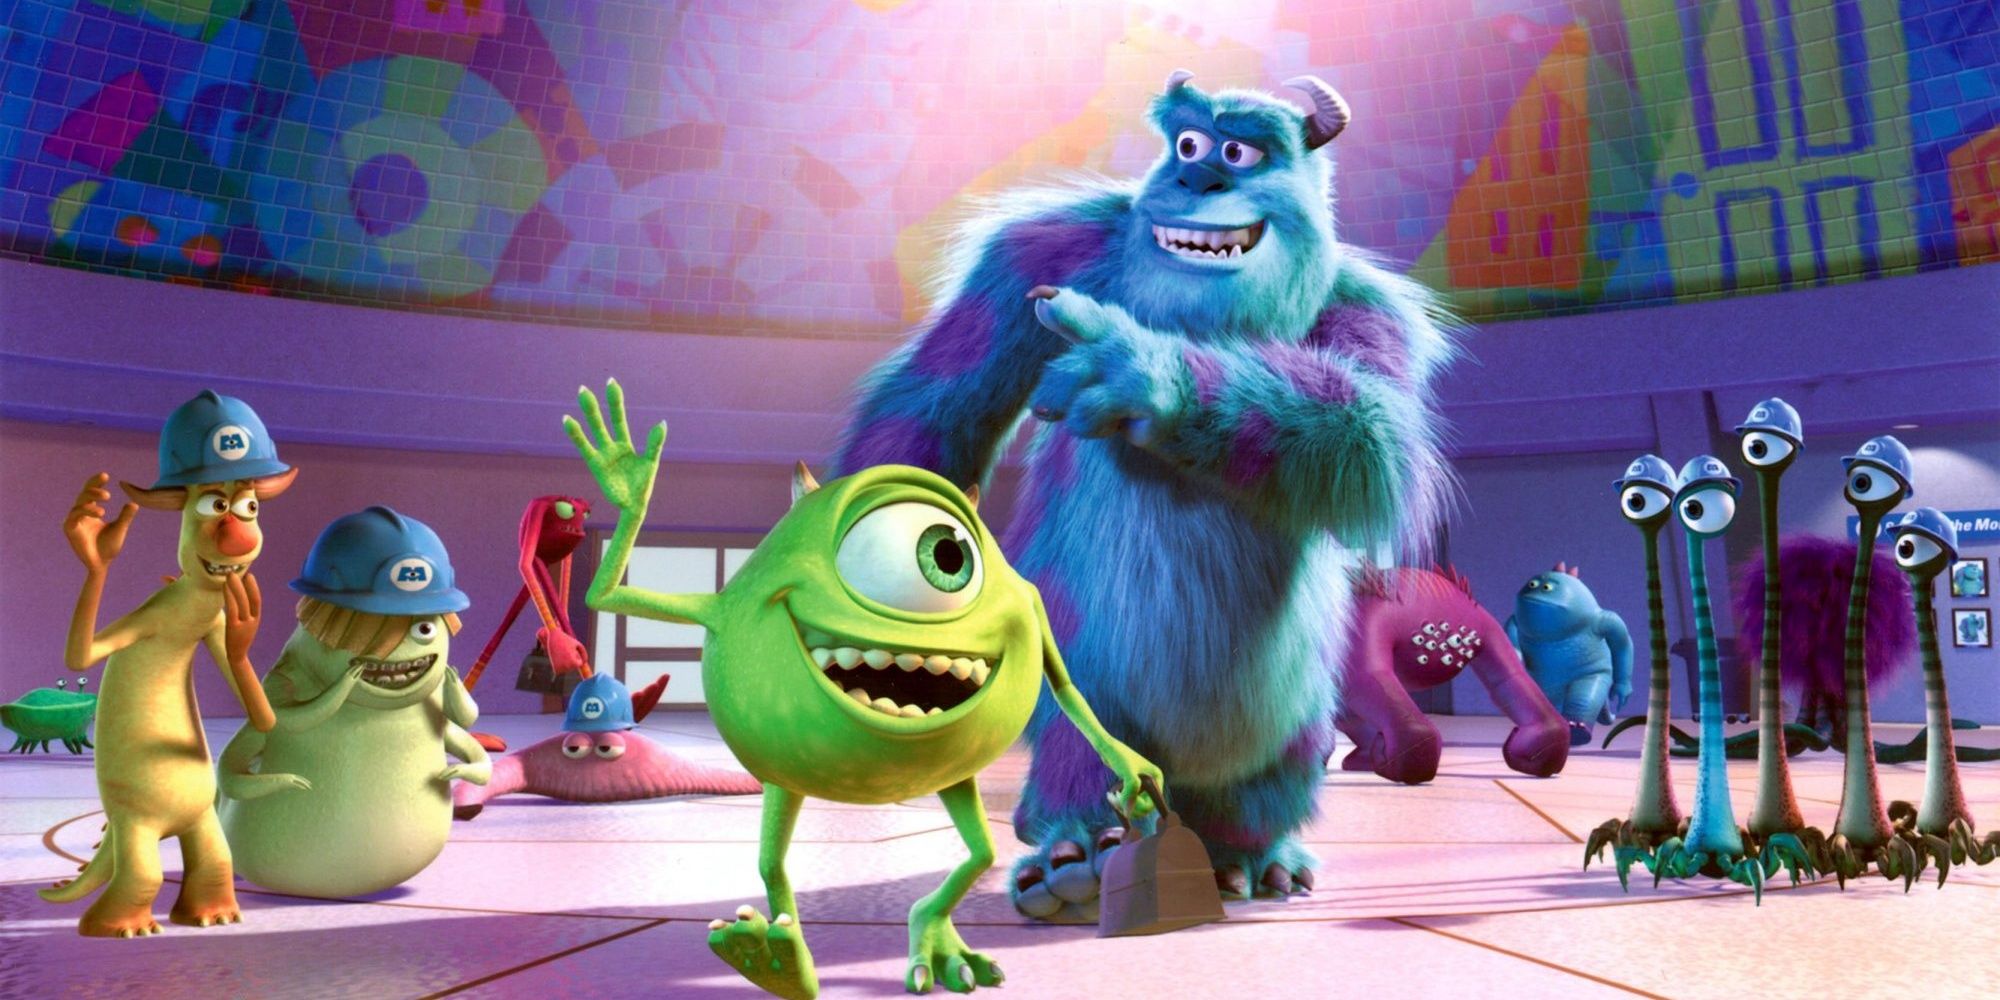 Mike and Sulley point and wave to the other monsters they work with